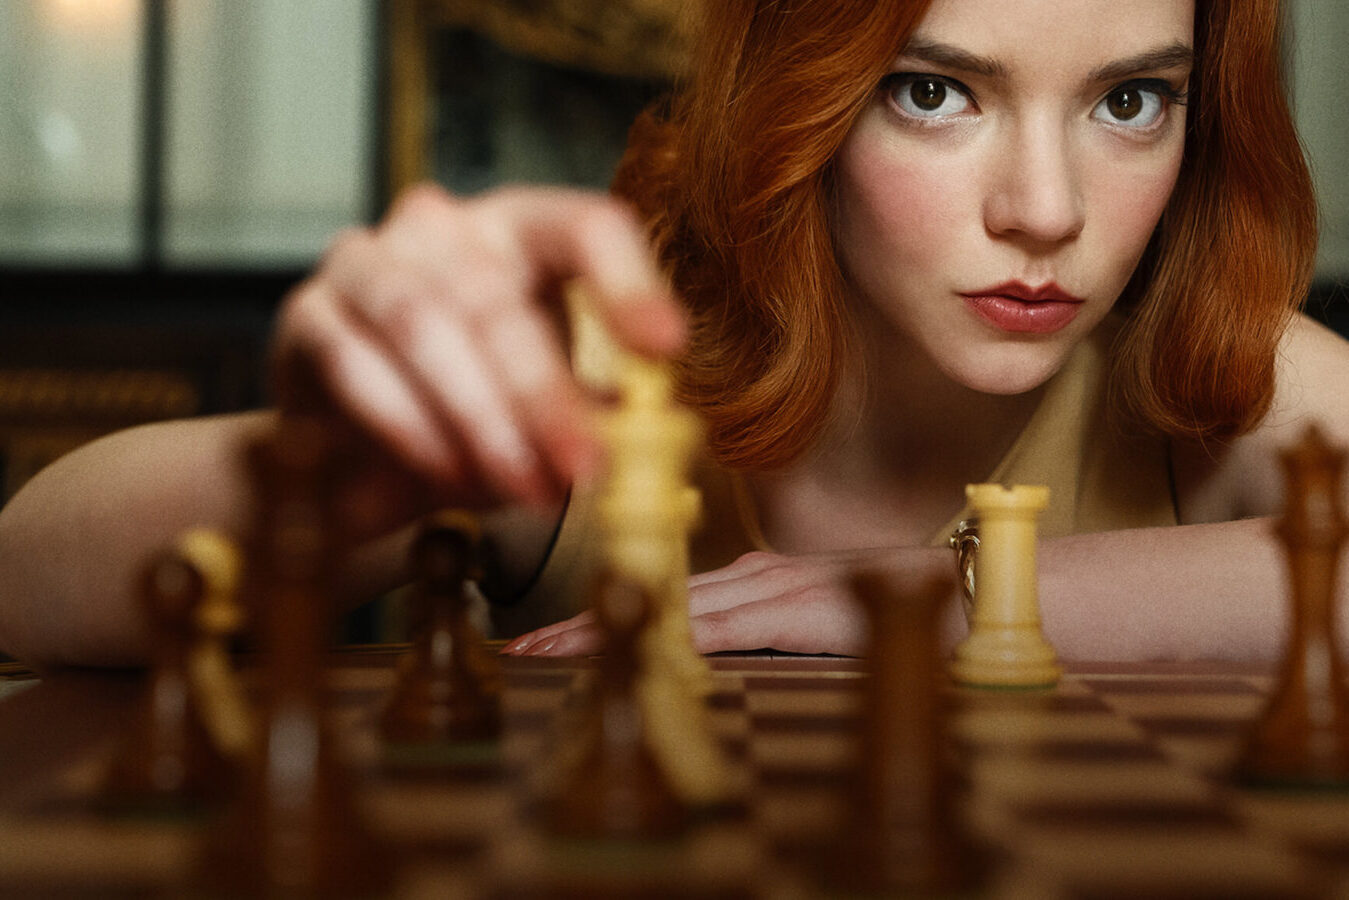 The Queen's Gambit' Season 2: Updates On The Possibility Of More